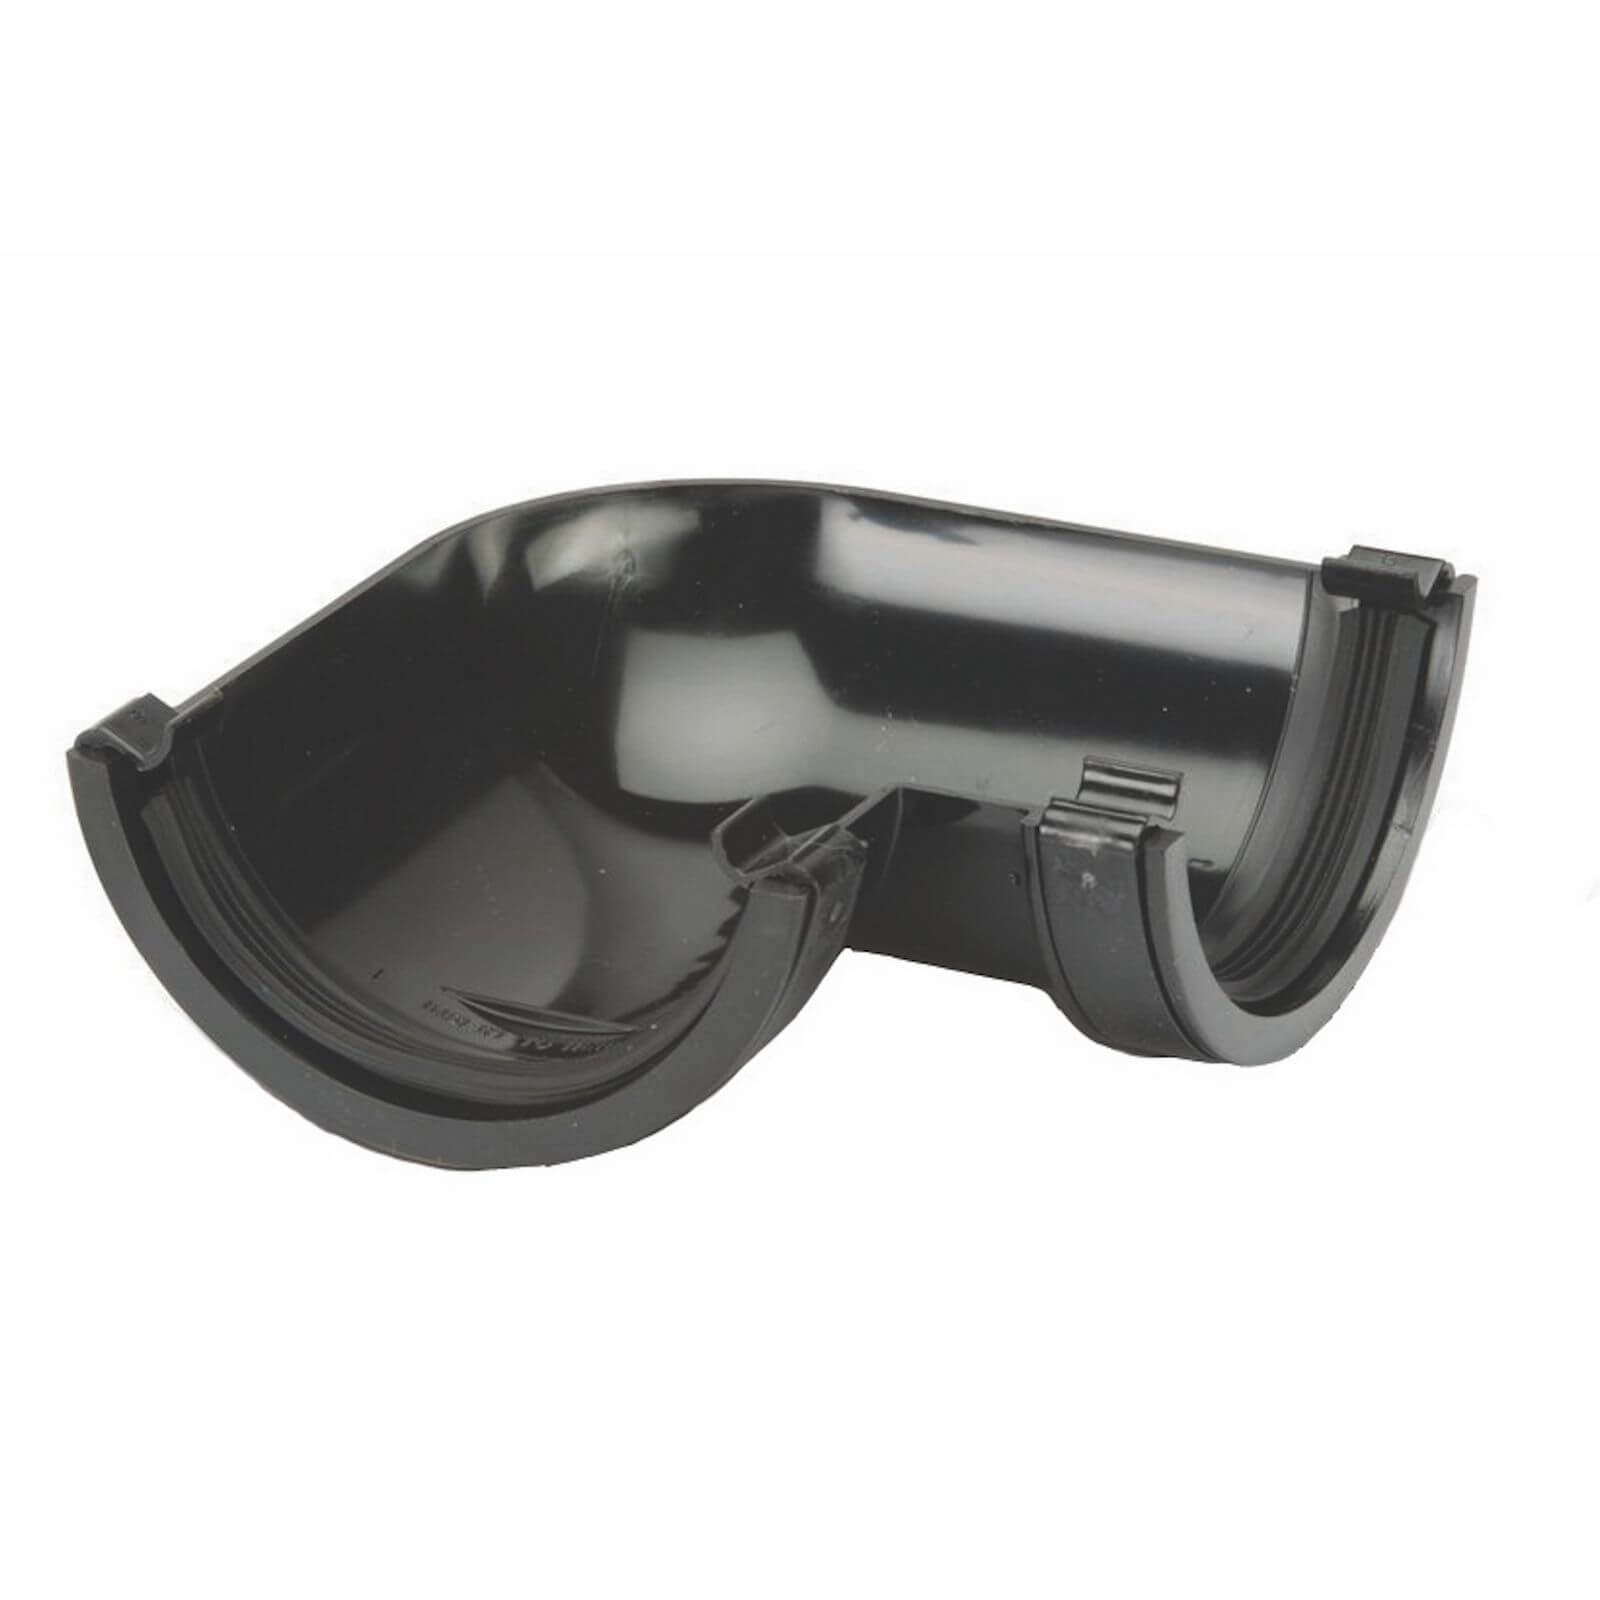 Photo of Polypipe Half Round Gutter Angle - 112mm X 90 Degree - Black